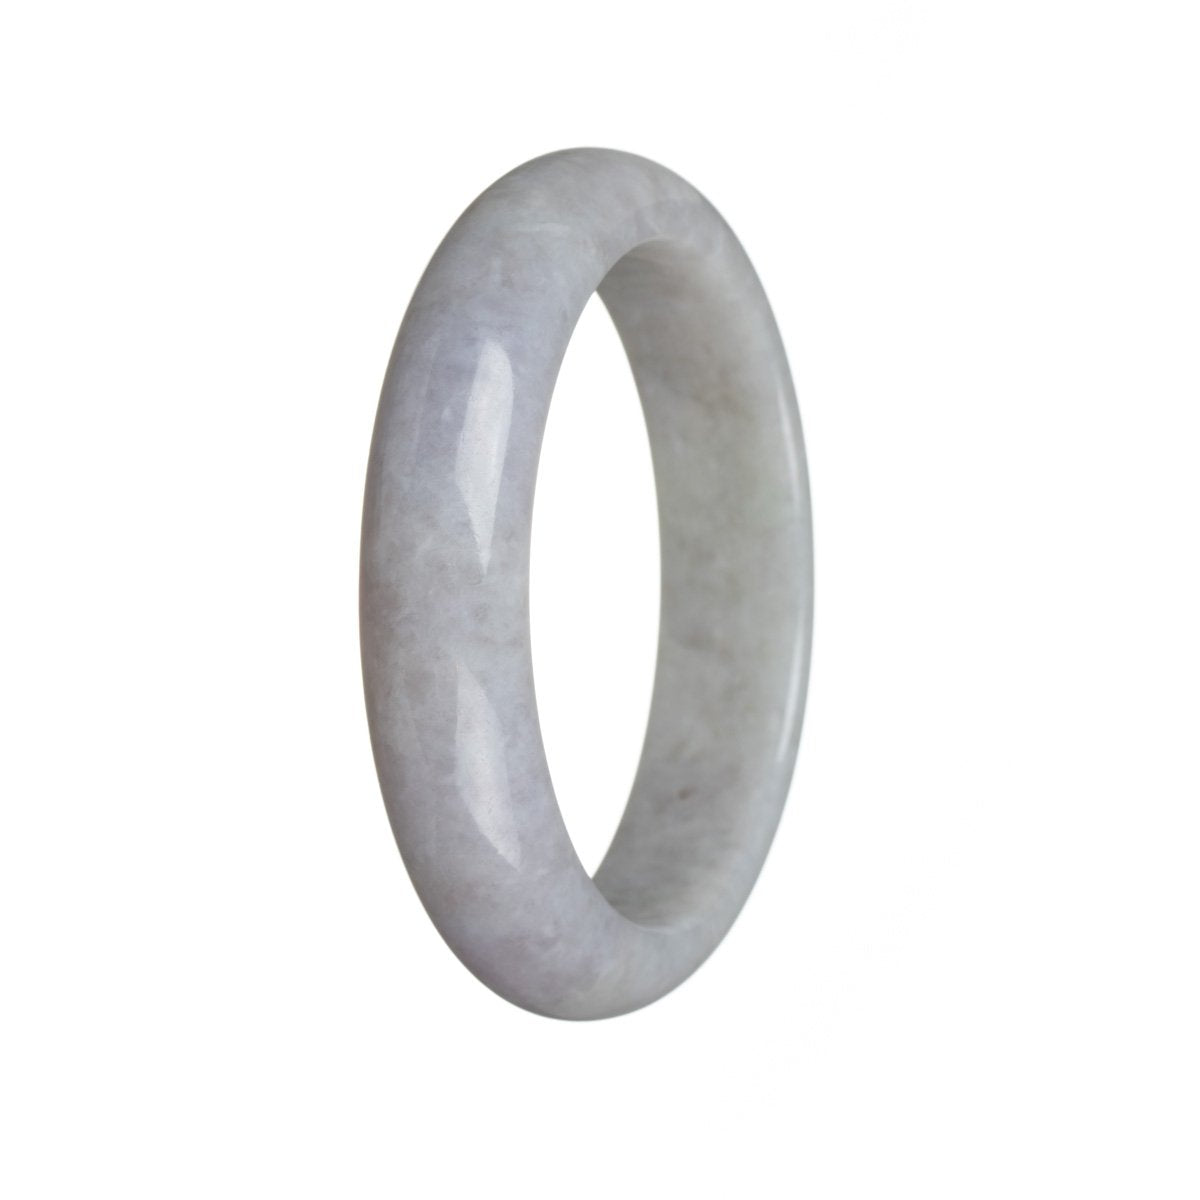 A lavender traditional jade bangle bracelet with a semi-round shape and authentic Grade A quality. It measures 61mm in diameter. Sold by MAYS.